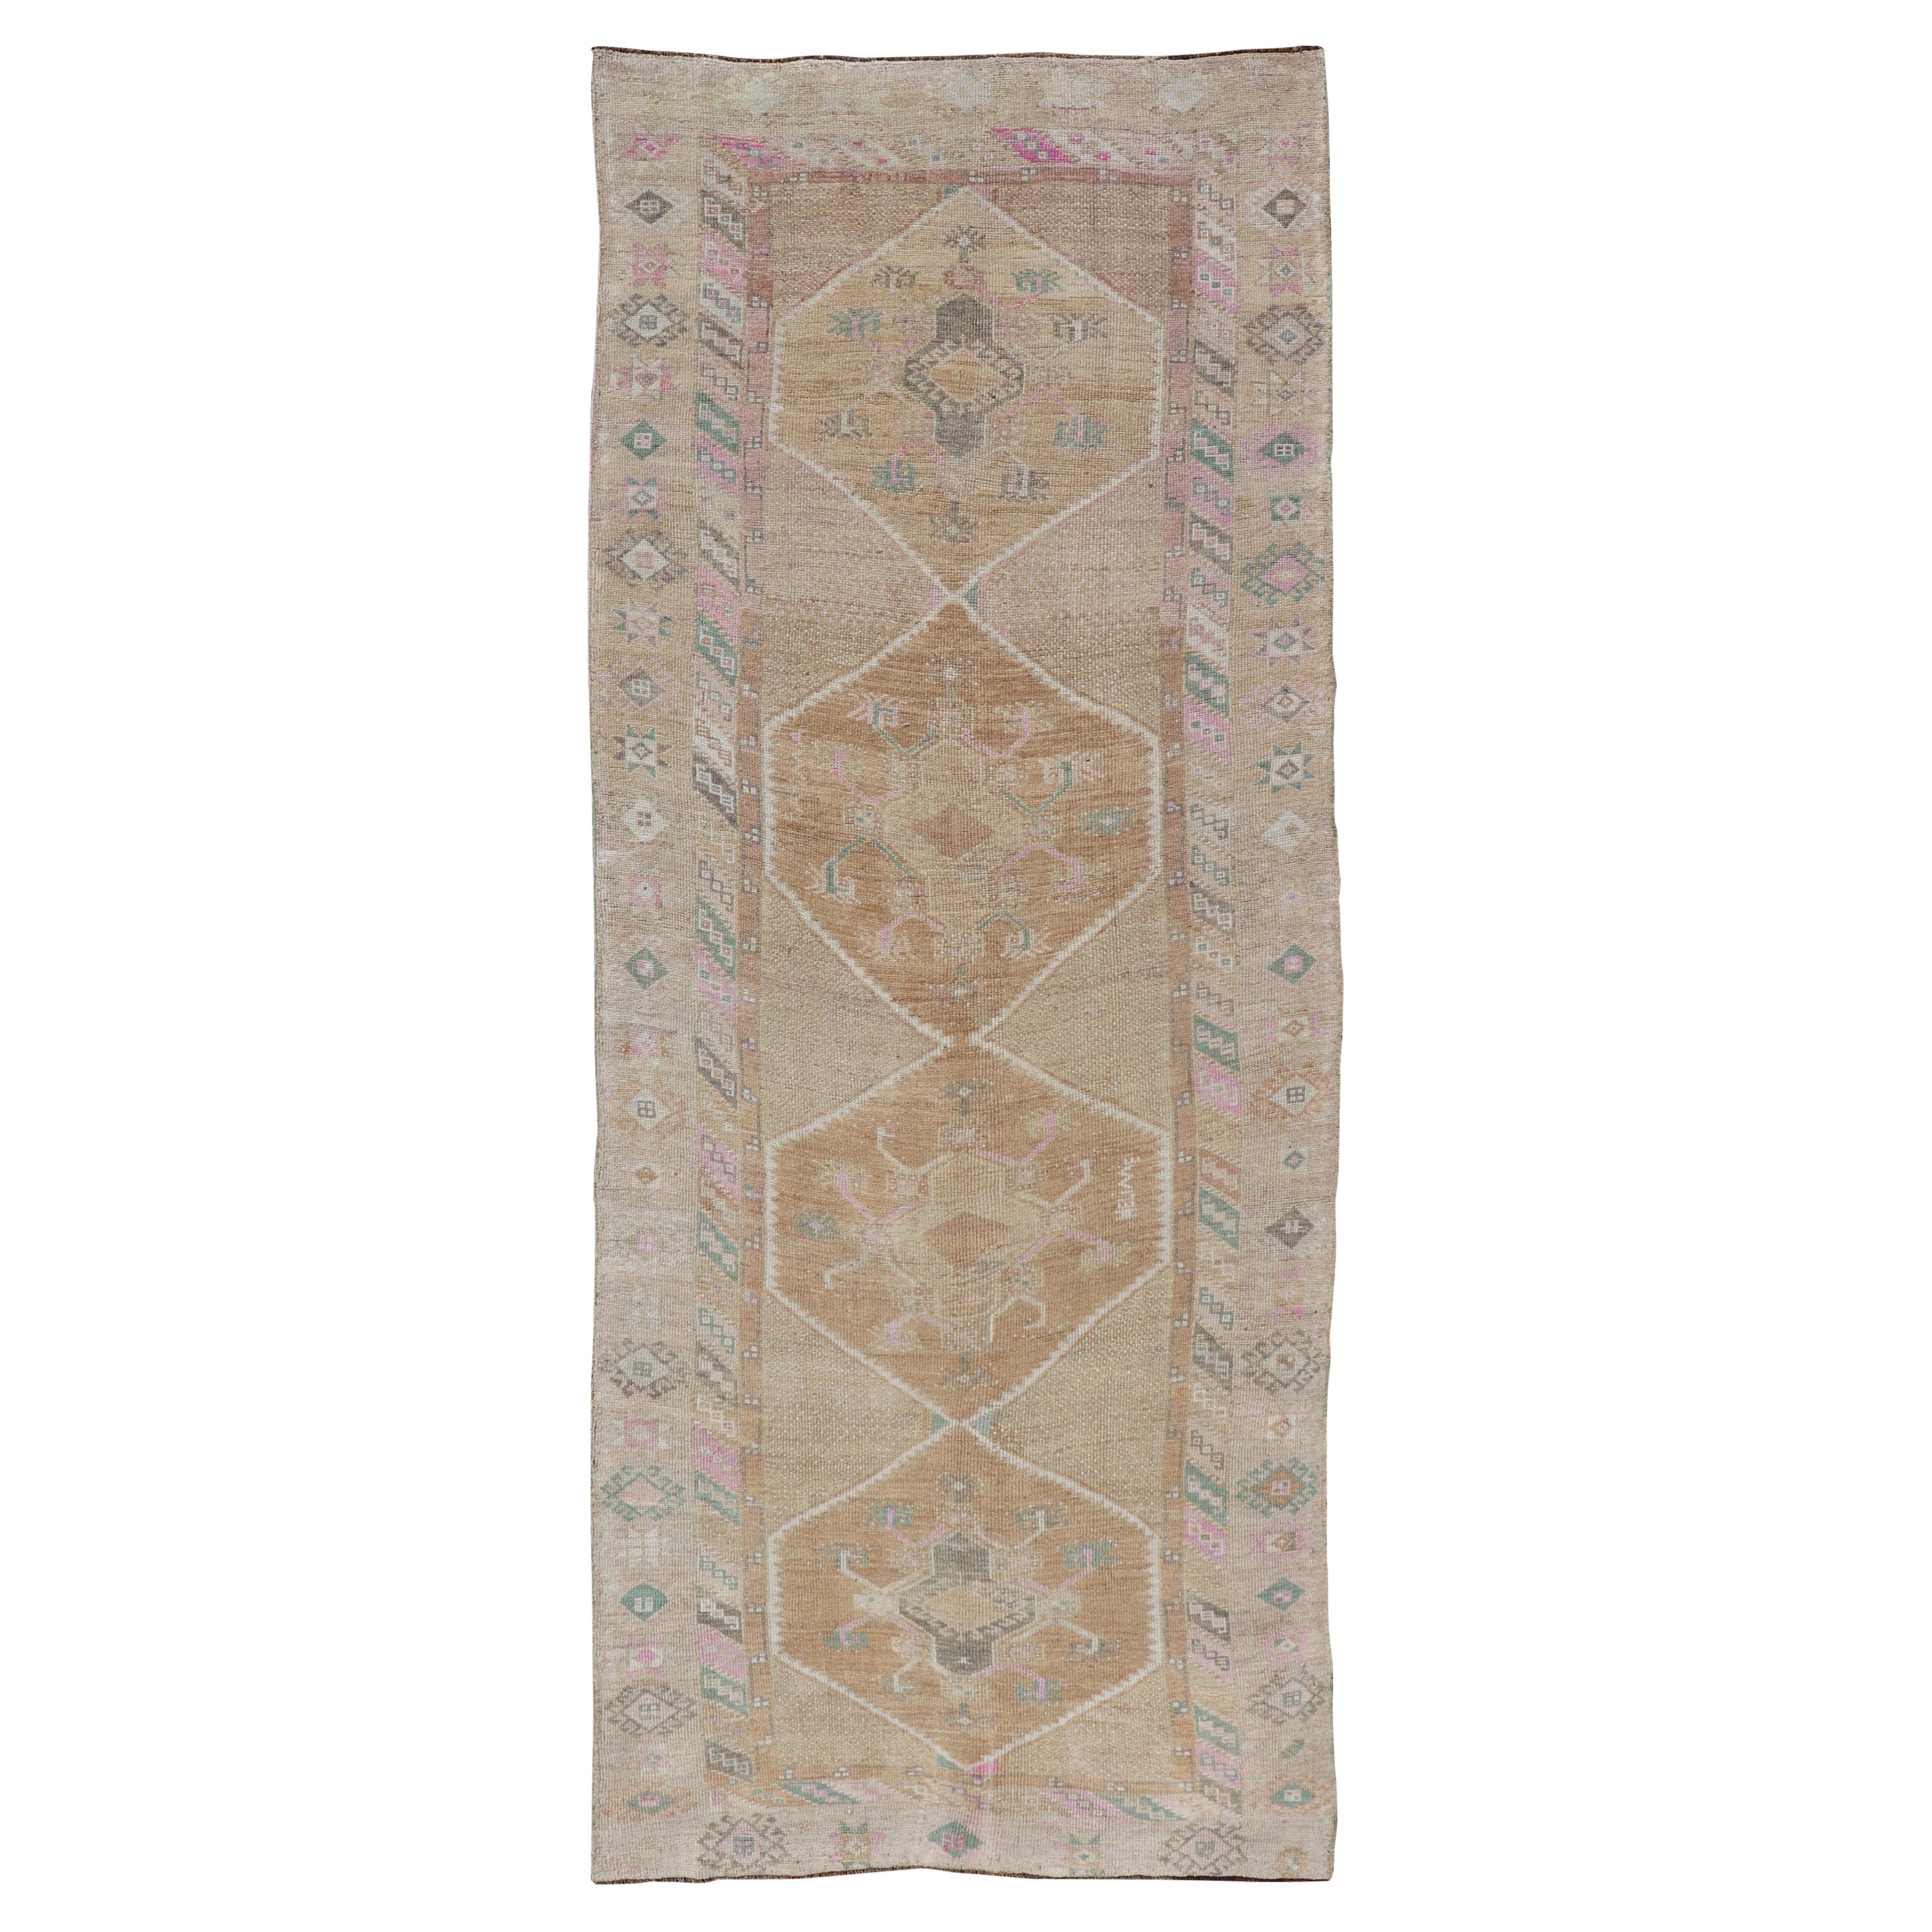 Unique & Colorful Turkish Kars Runner with Tribal Designs and Geometric Motifs